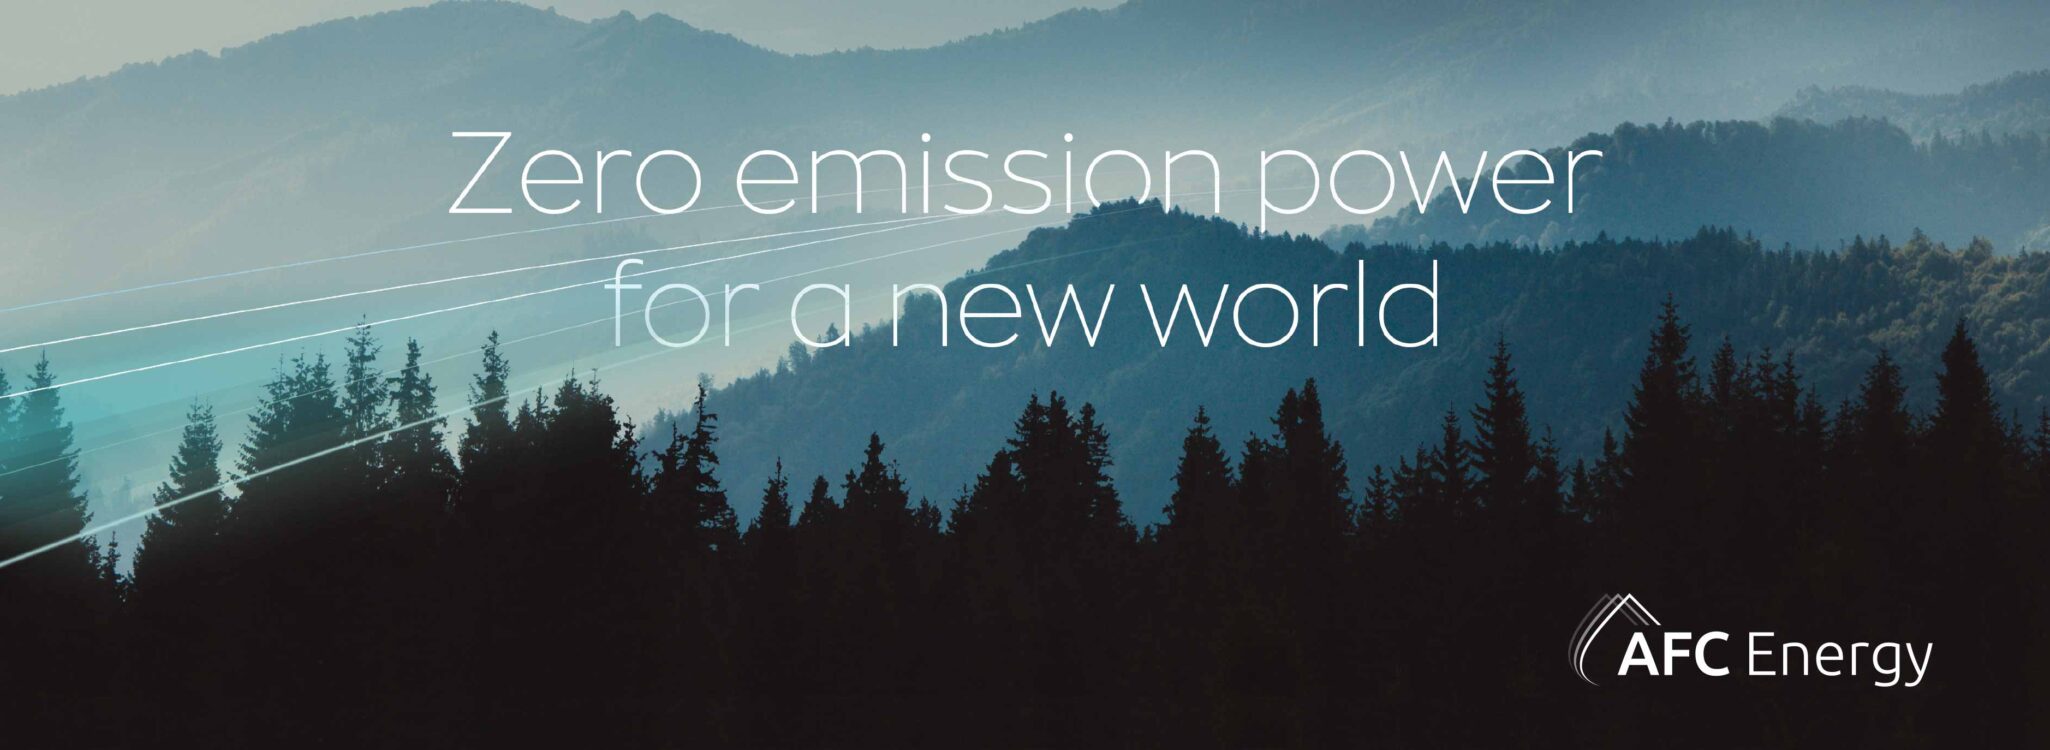 Zero emission power for a new world